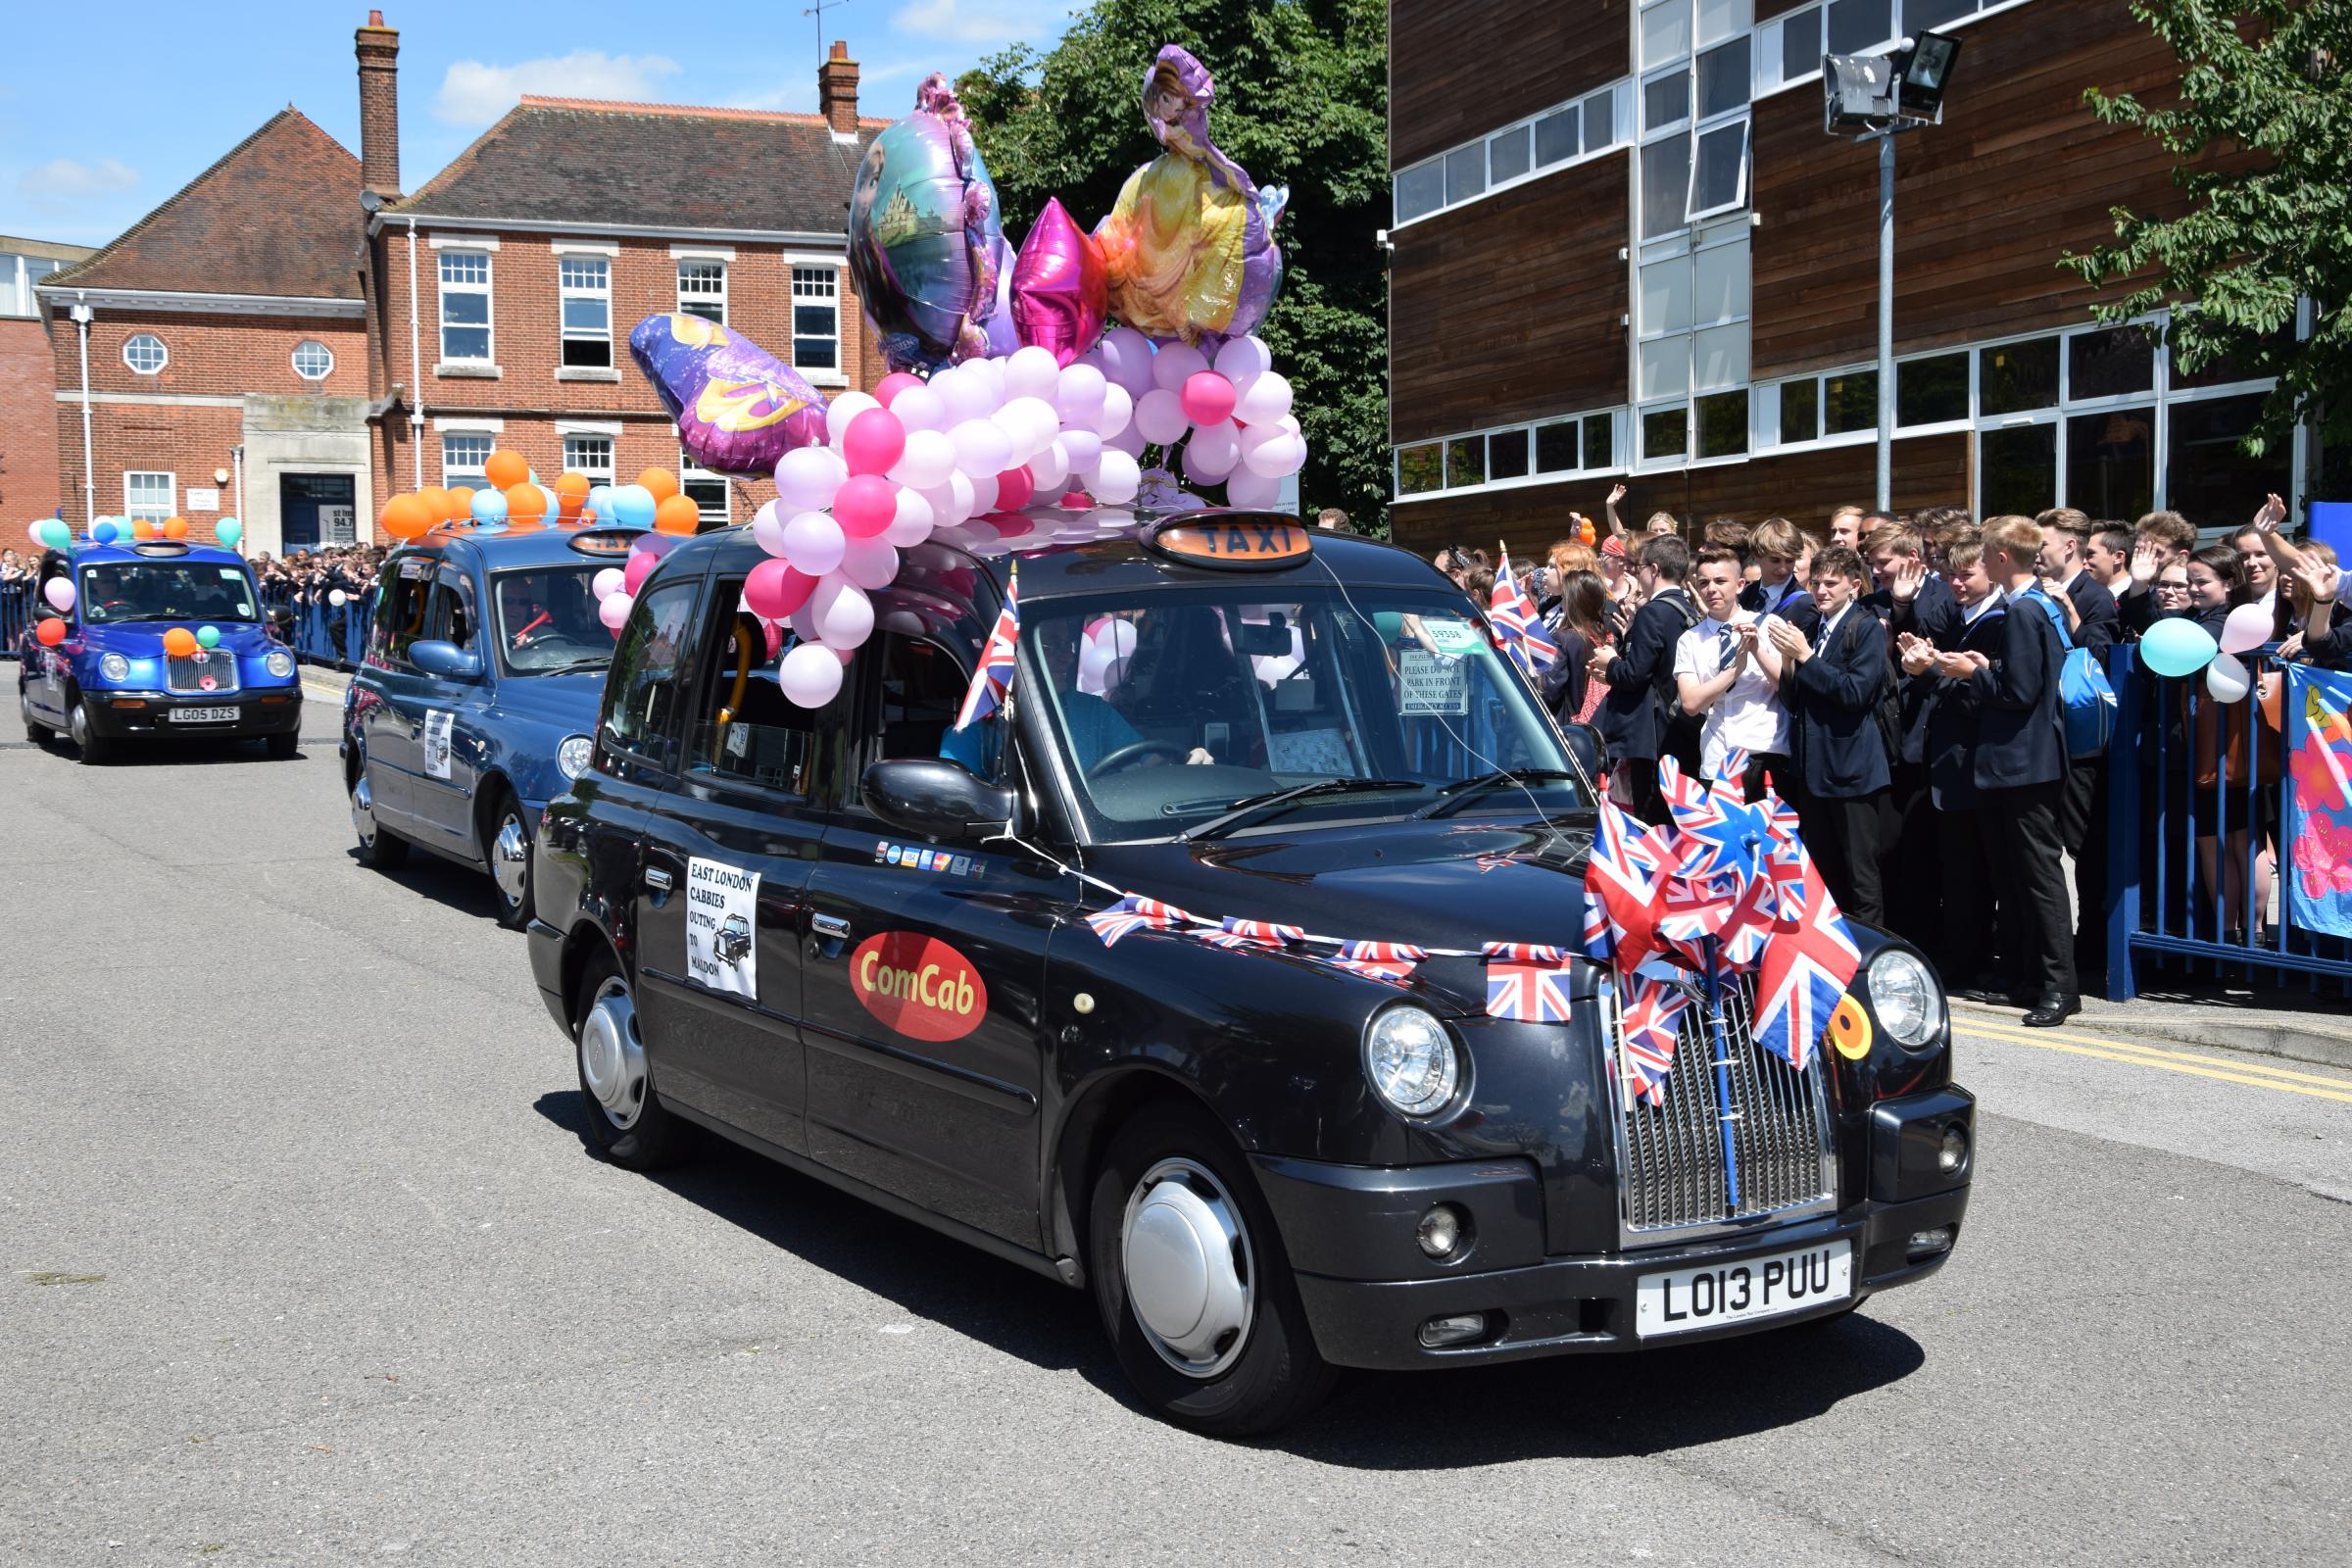 Shock and disappointment as famous Cabbie Day cancelled due to lack of volunteers